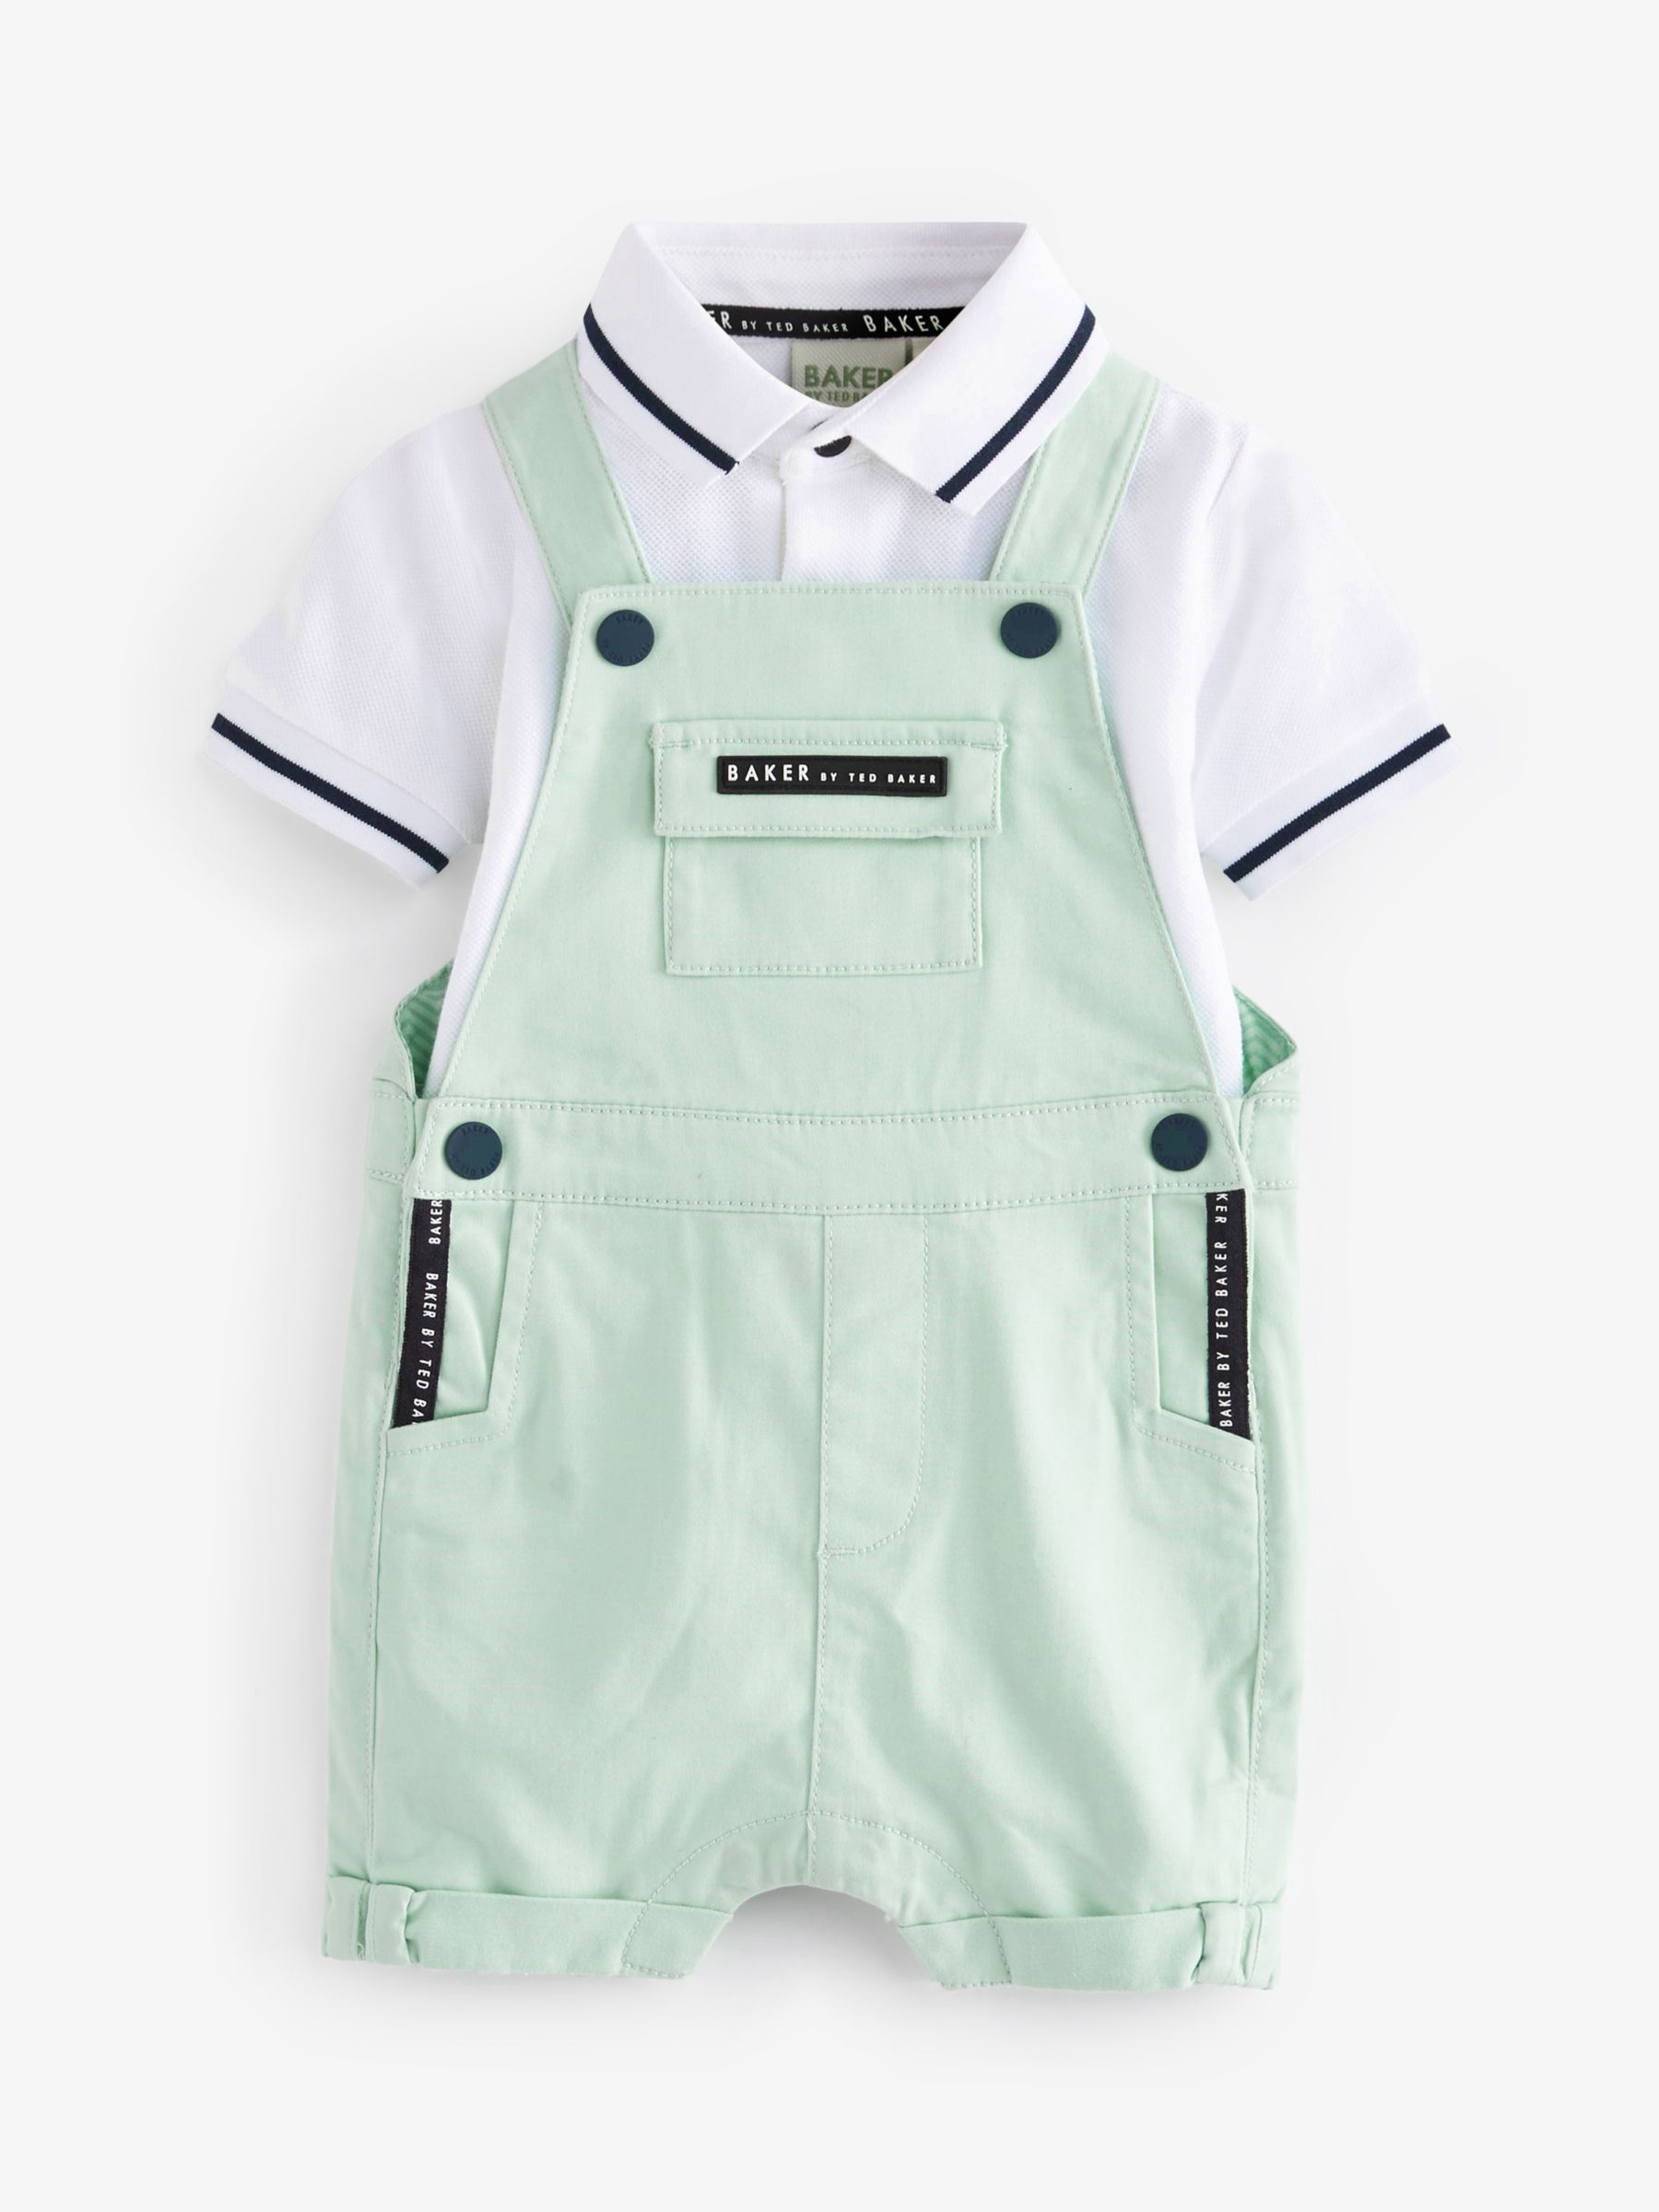 Ted Baker Baby Dungarees & Polo Shirt Set, Green, 0-3 months